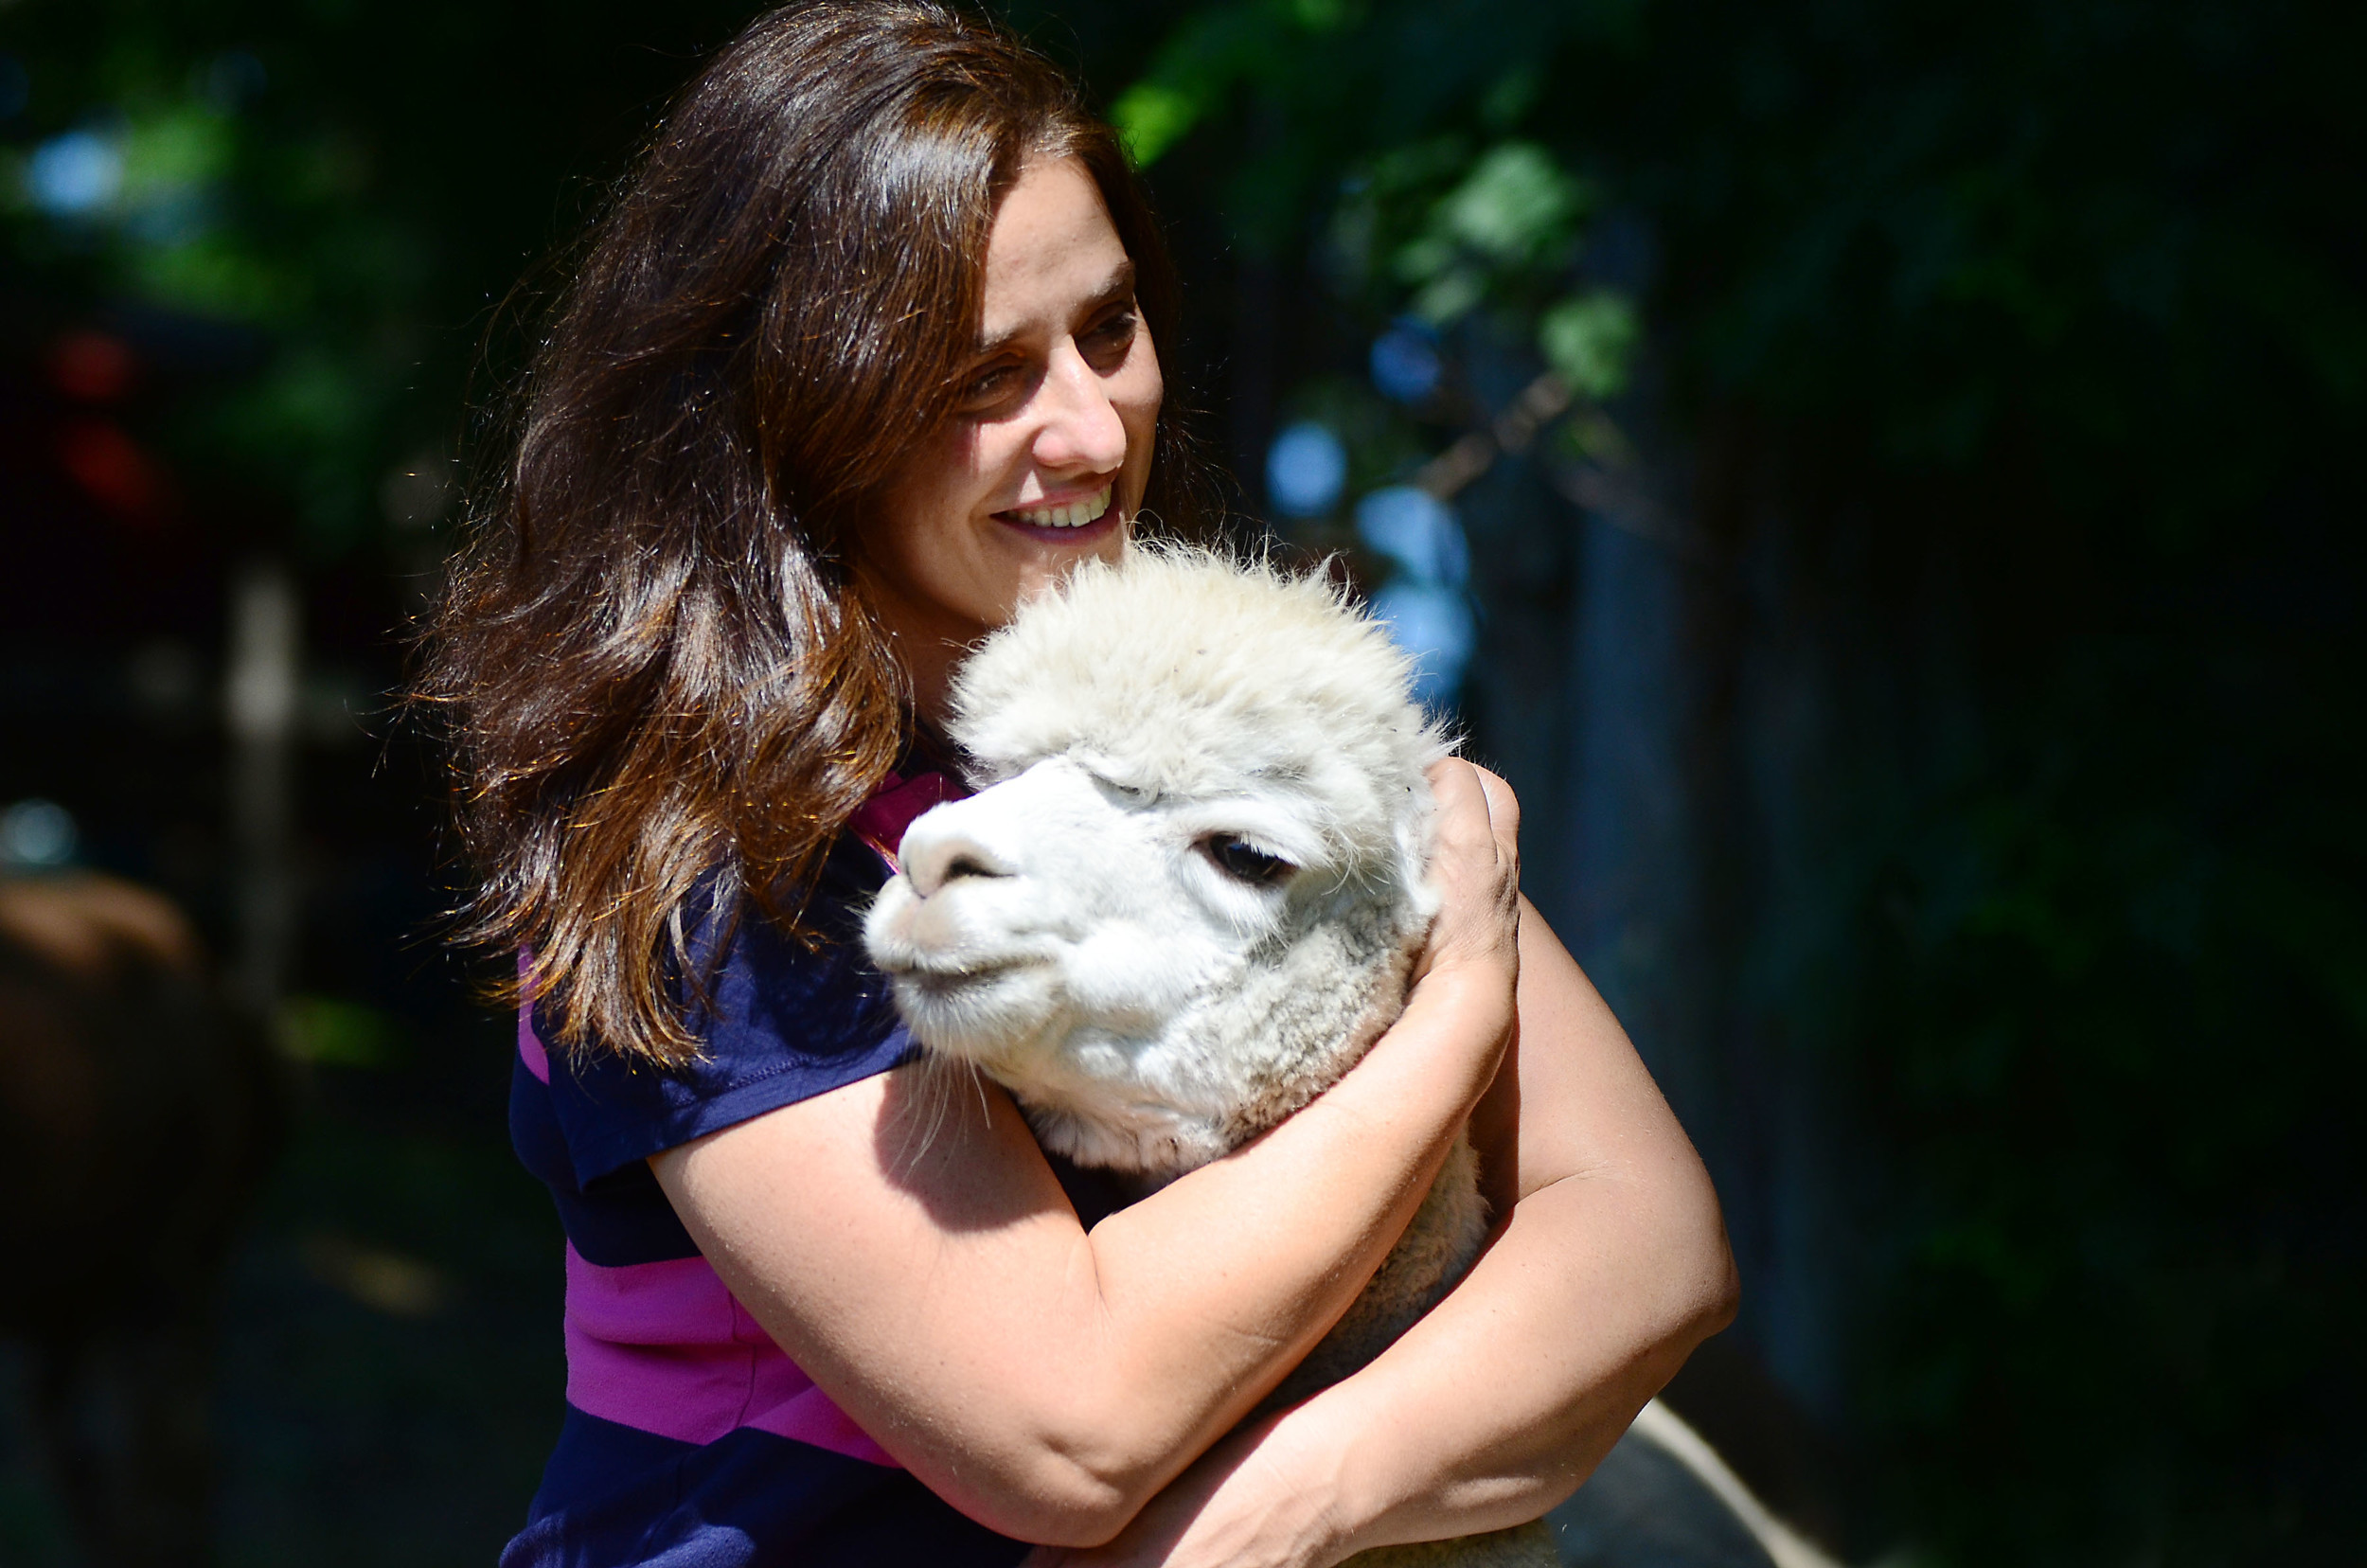 Ann Fiore with one of her alpacas at Glen Ridge Farm in September 2014. In 2010 the farm became involved in a dispute over a paper road for a residential development approved on farmland owned by Rhode Island Nurseries to the north of Glen Ridge.